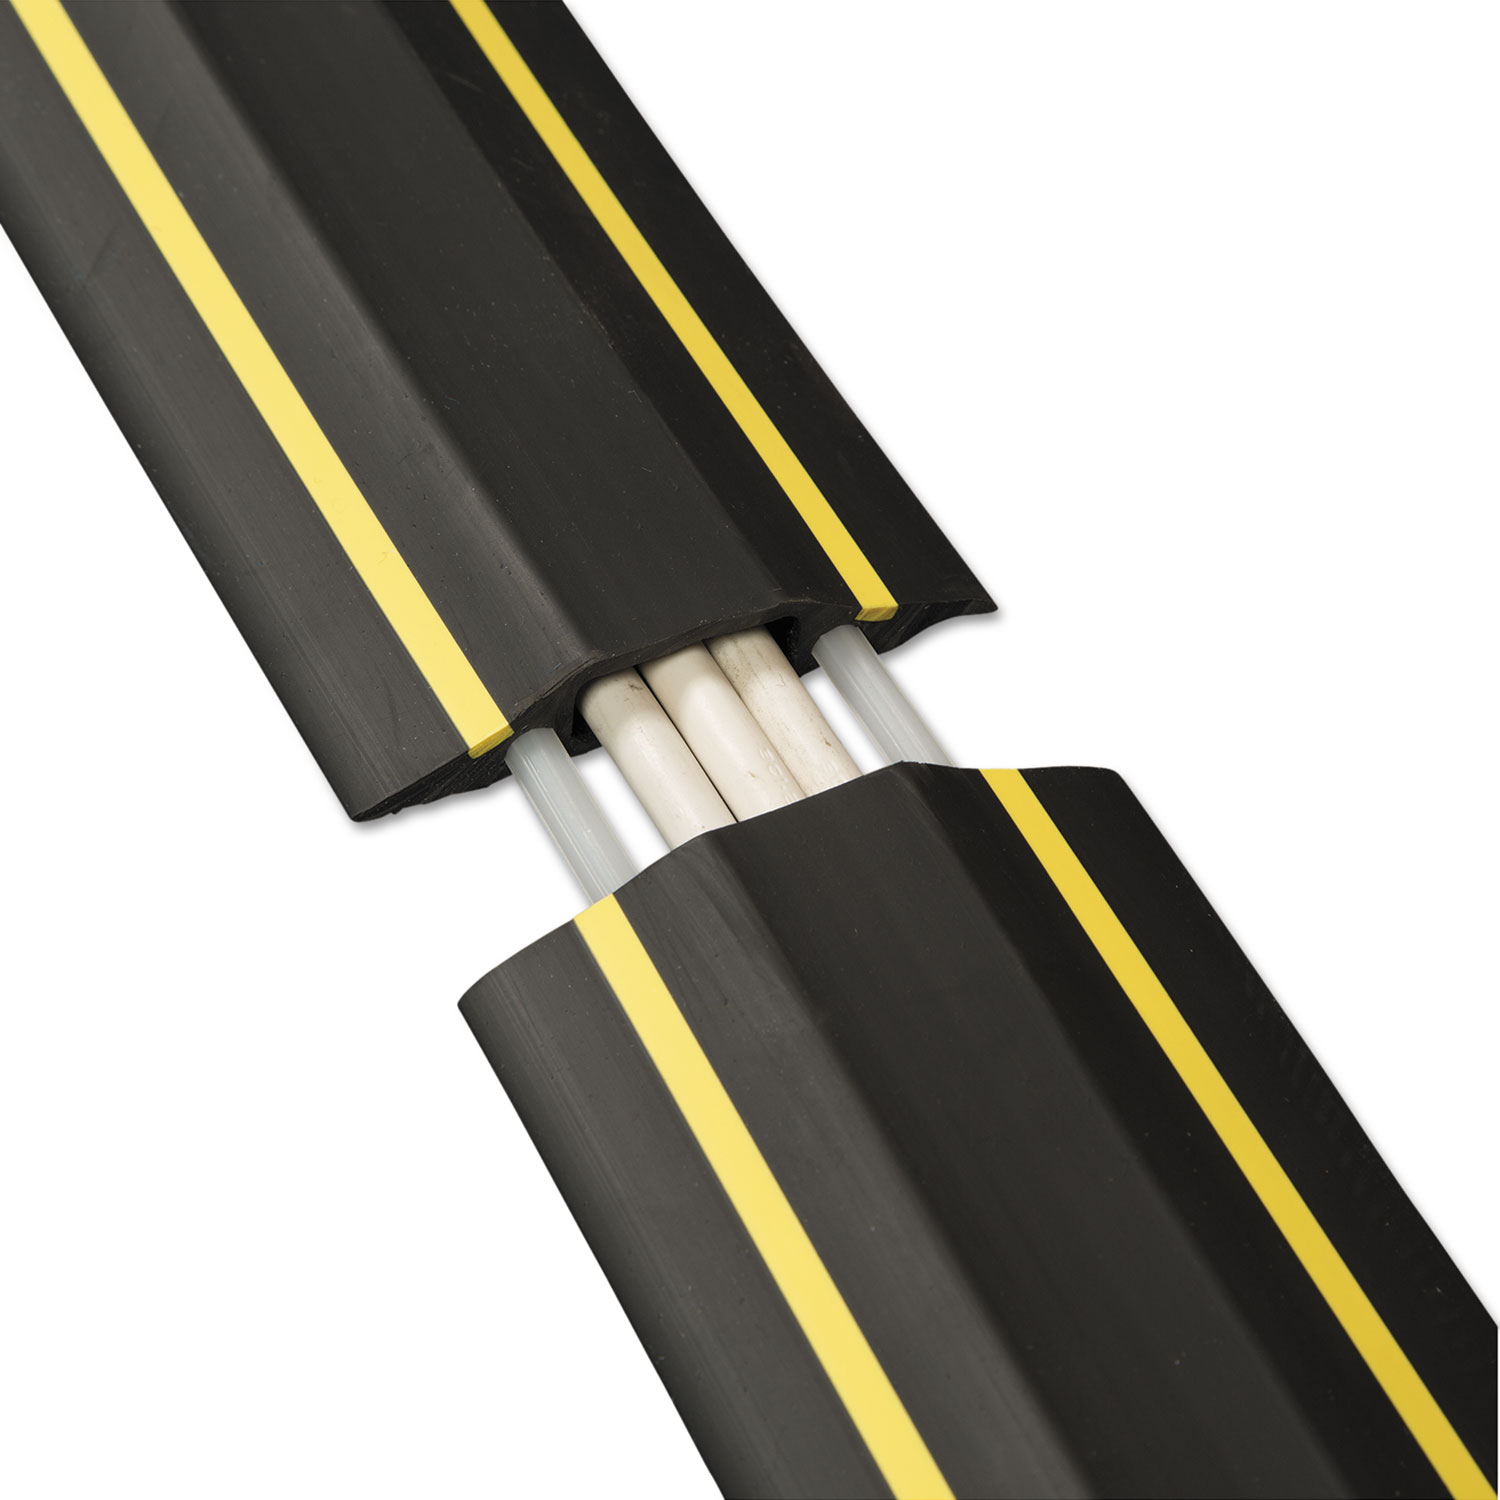 Medium-Duty Floor Cable Cover, 3 1/4 x 1/2 x 6 ft, Black with Yellow Stripe